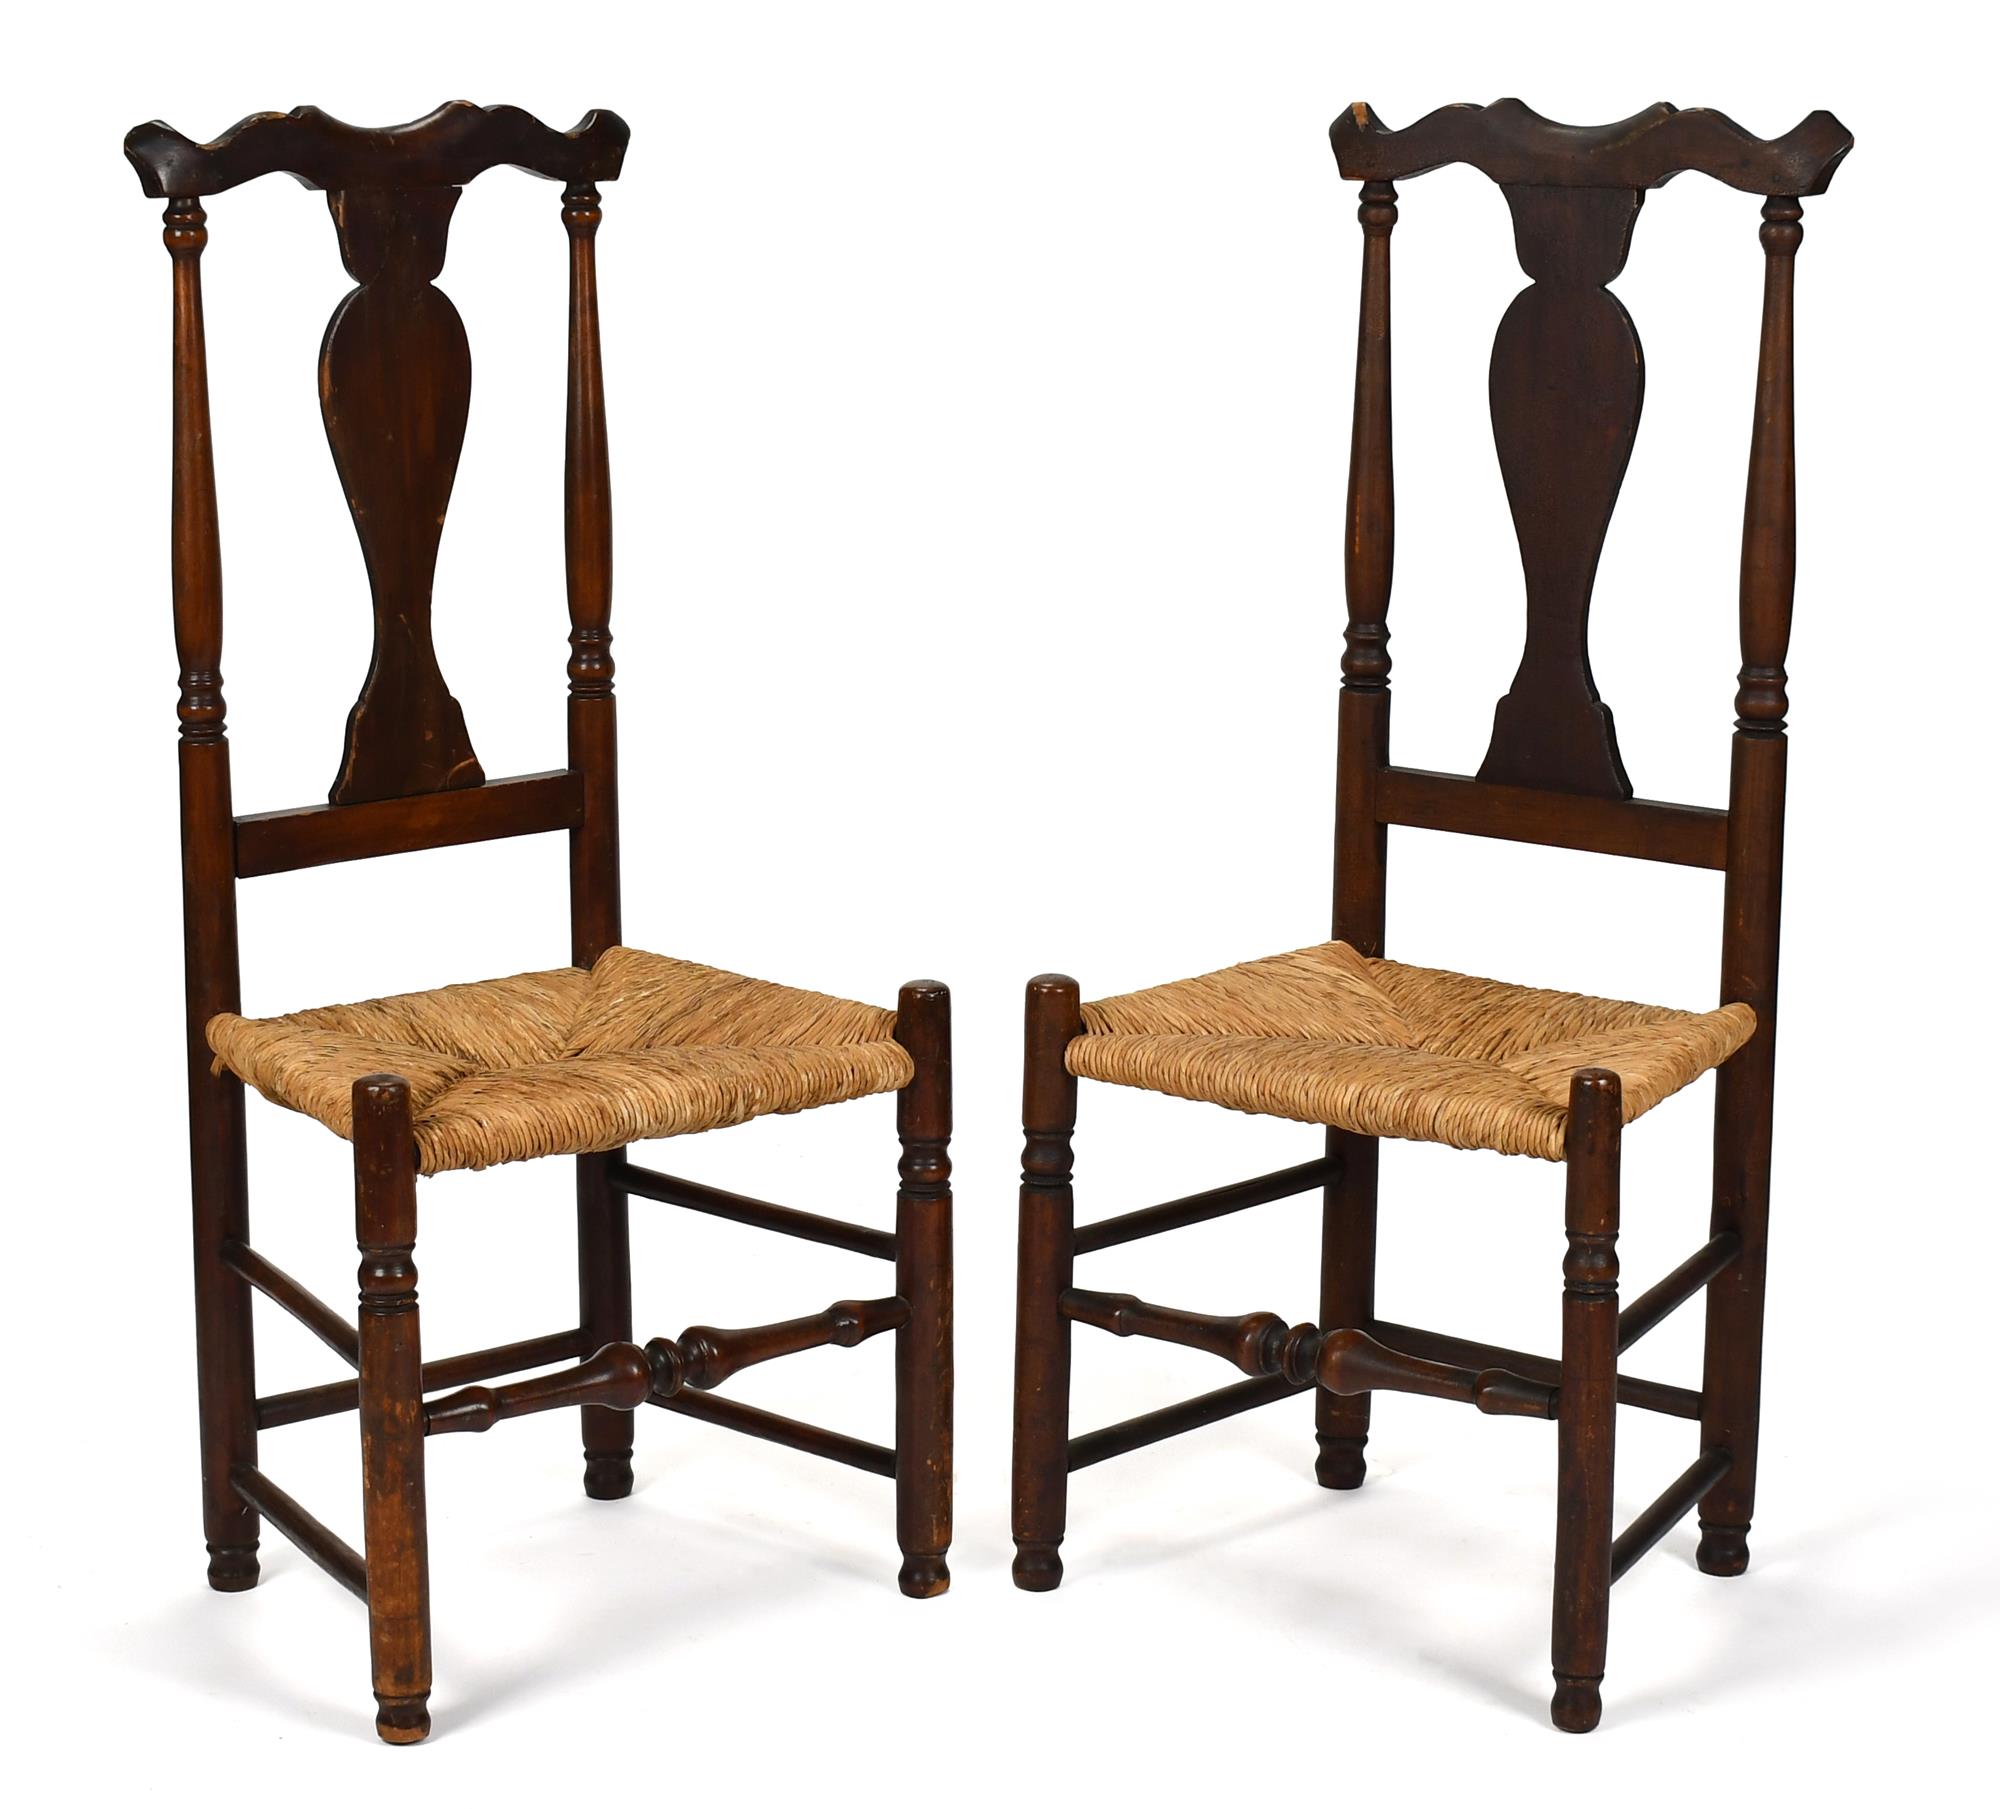 PAIR OF COUNTRY QUEEN ANNE CHAIRS  3accb3